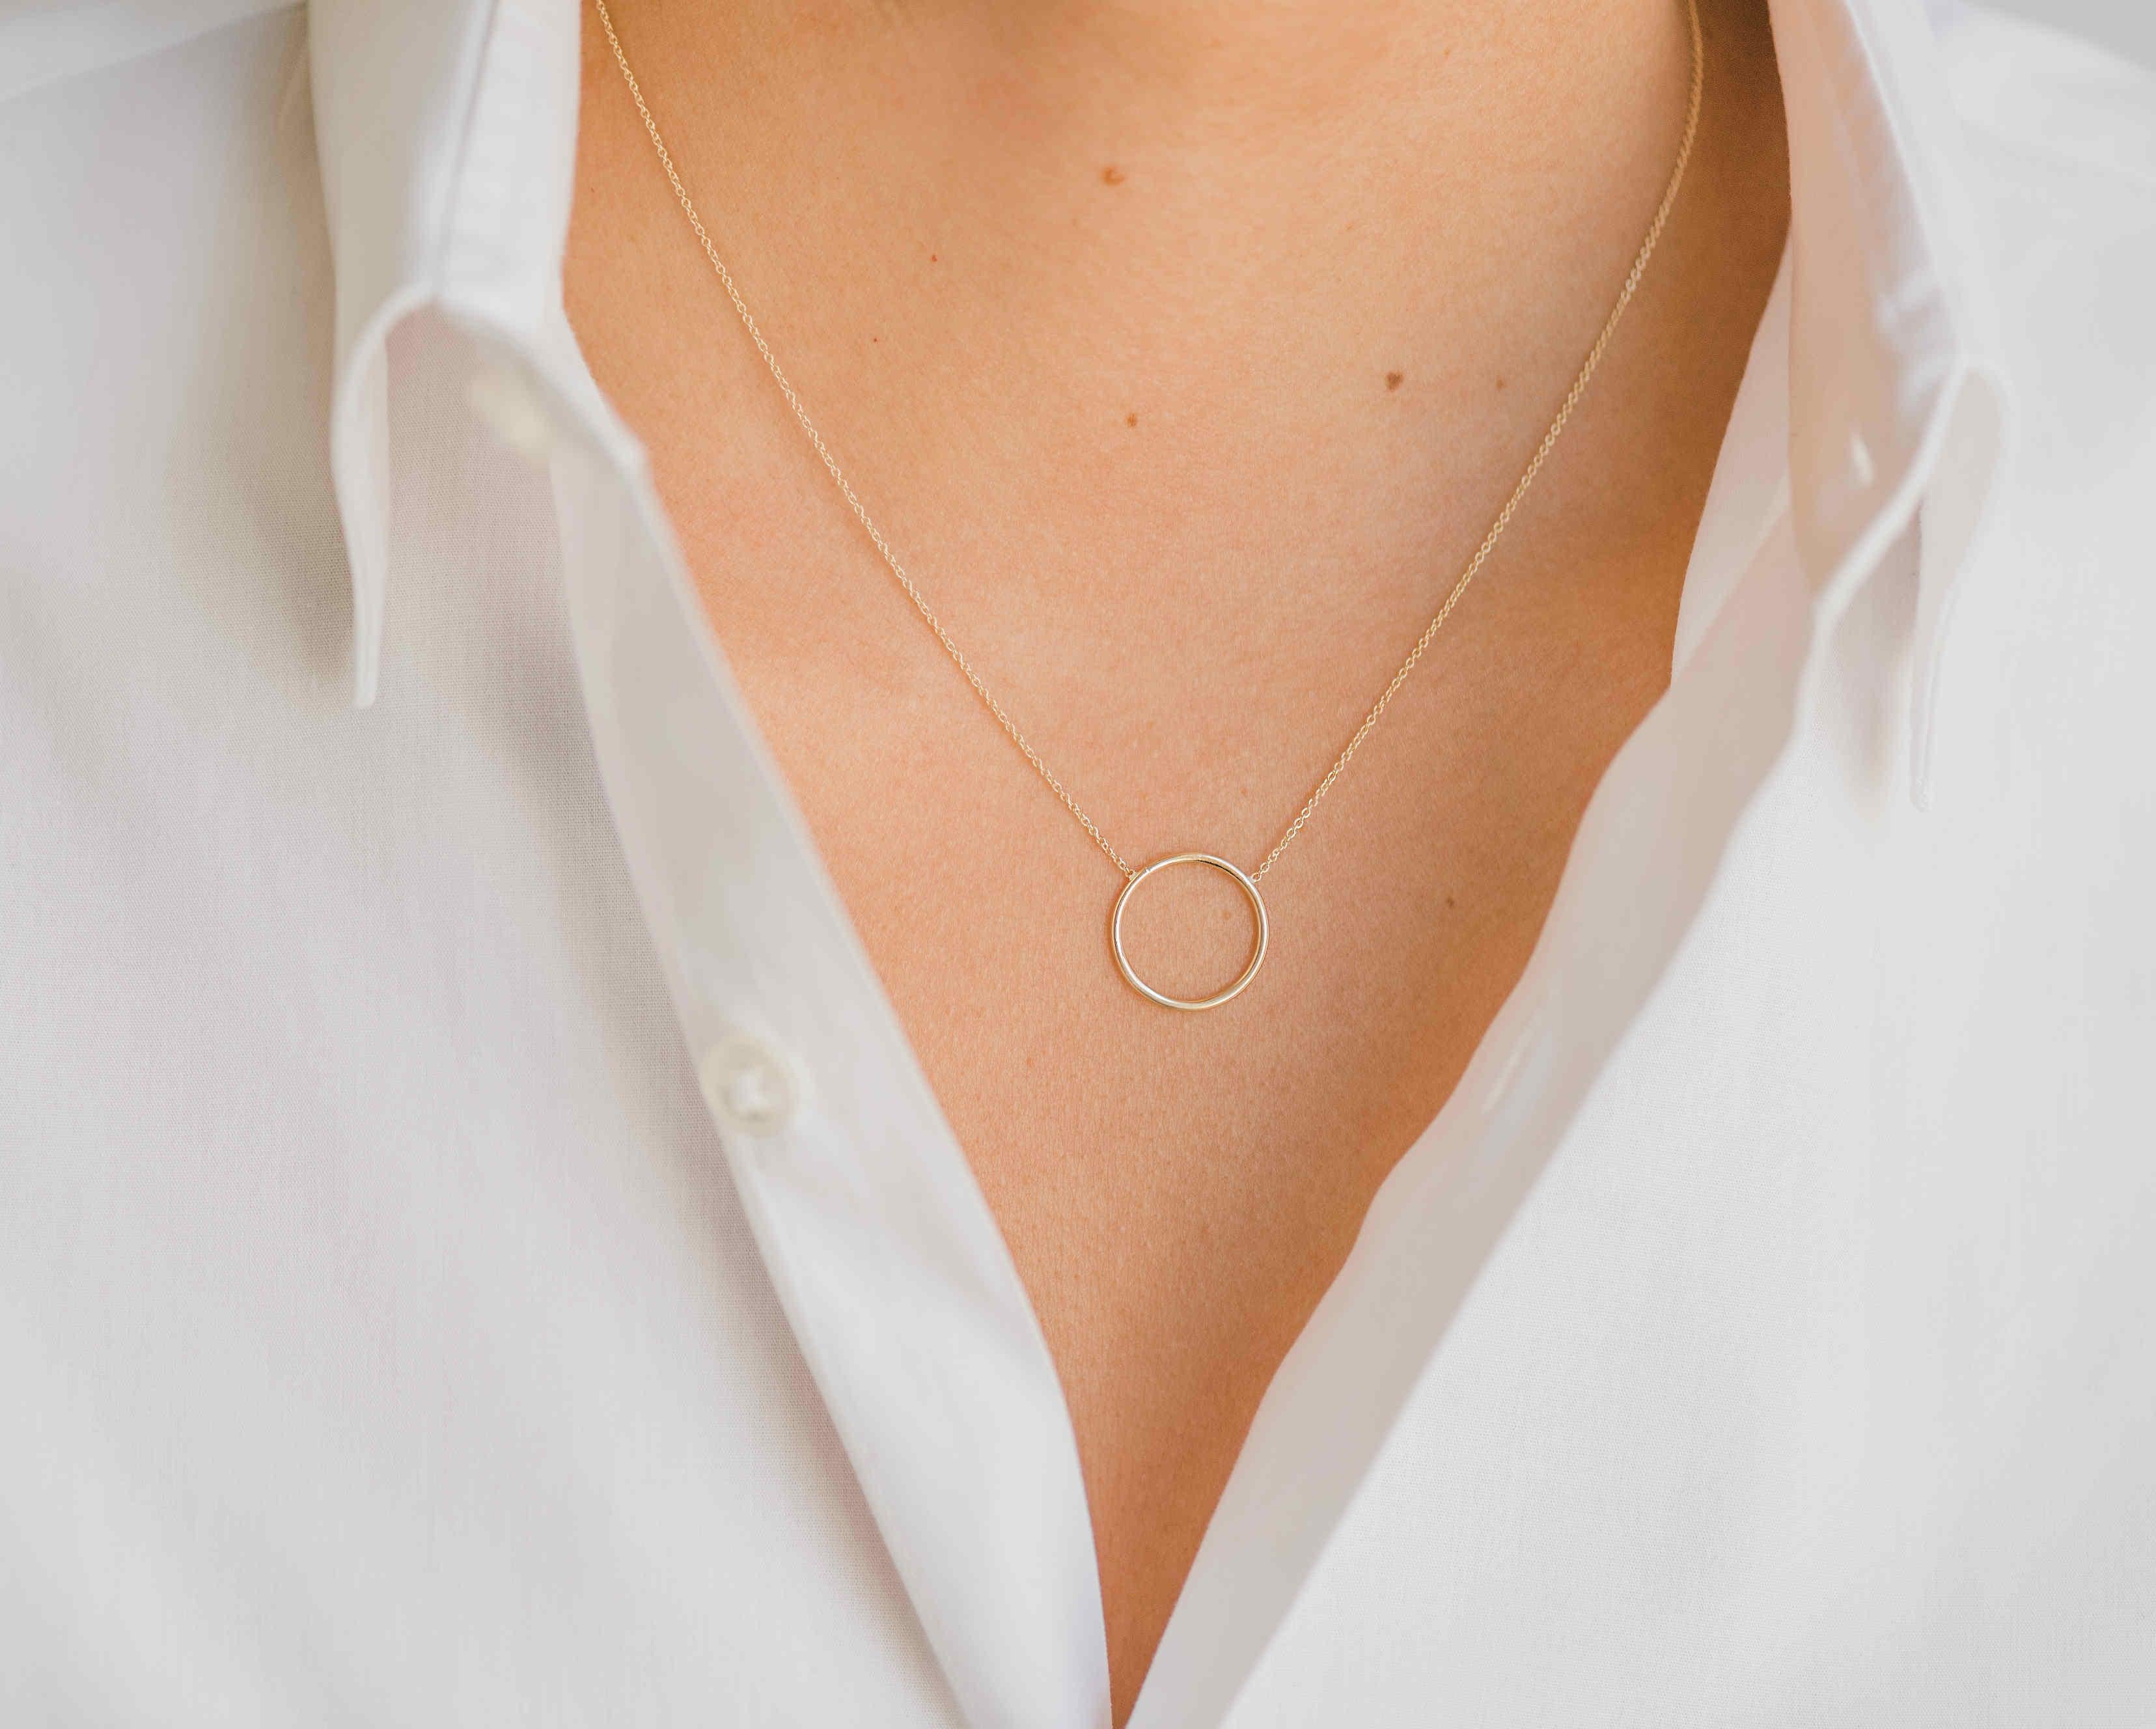 14K solid gold  circle ring necklace in 14k yellow gold. A simple, dainty and classic piece, sits beautifully by itself or layered, an everyday kind of necklace that will be your new obsession!

Made in L.A.

Size or ring/circle: Approx. 10mm